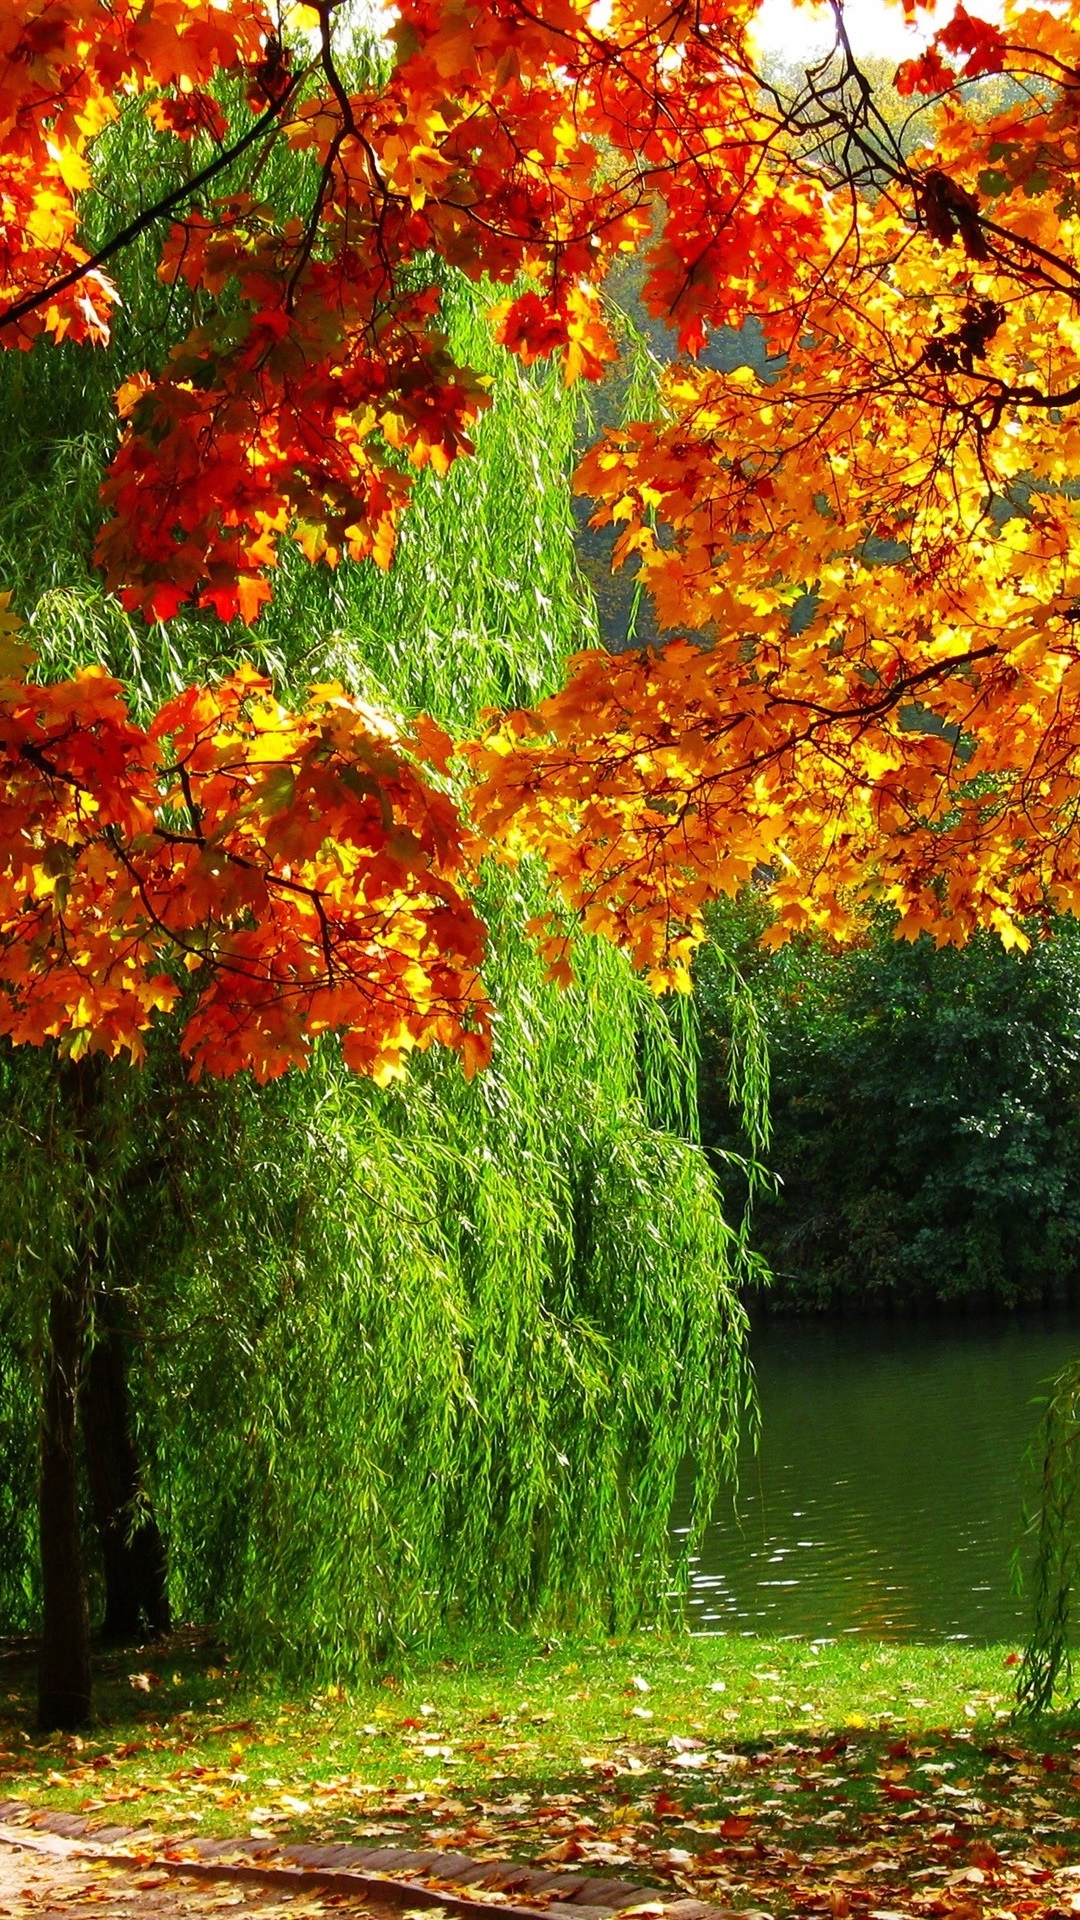 Iphone Wallpaper Forest, Autumn, Leaves, River - High Resolution Landscape Background - HD Wallpaper 